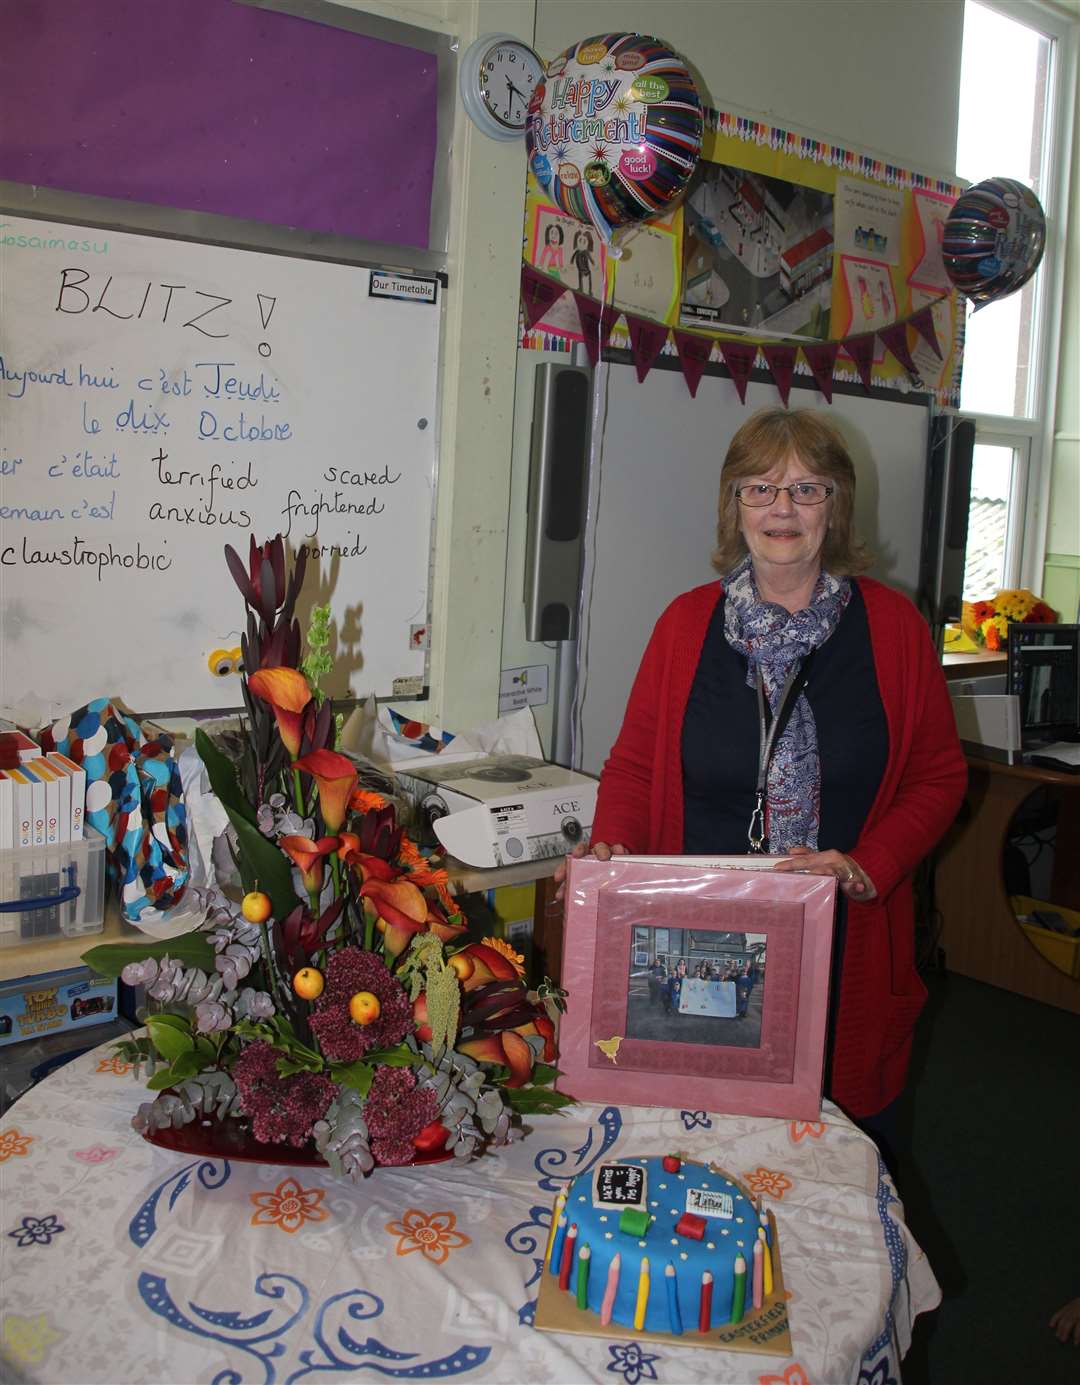 After almost three decades at Easterfield Primary School, Kathleen Heggie was inundated with gifts. Picture: Kirsty Brown